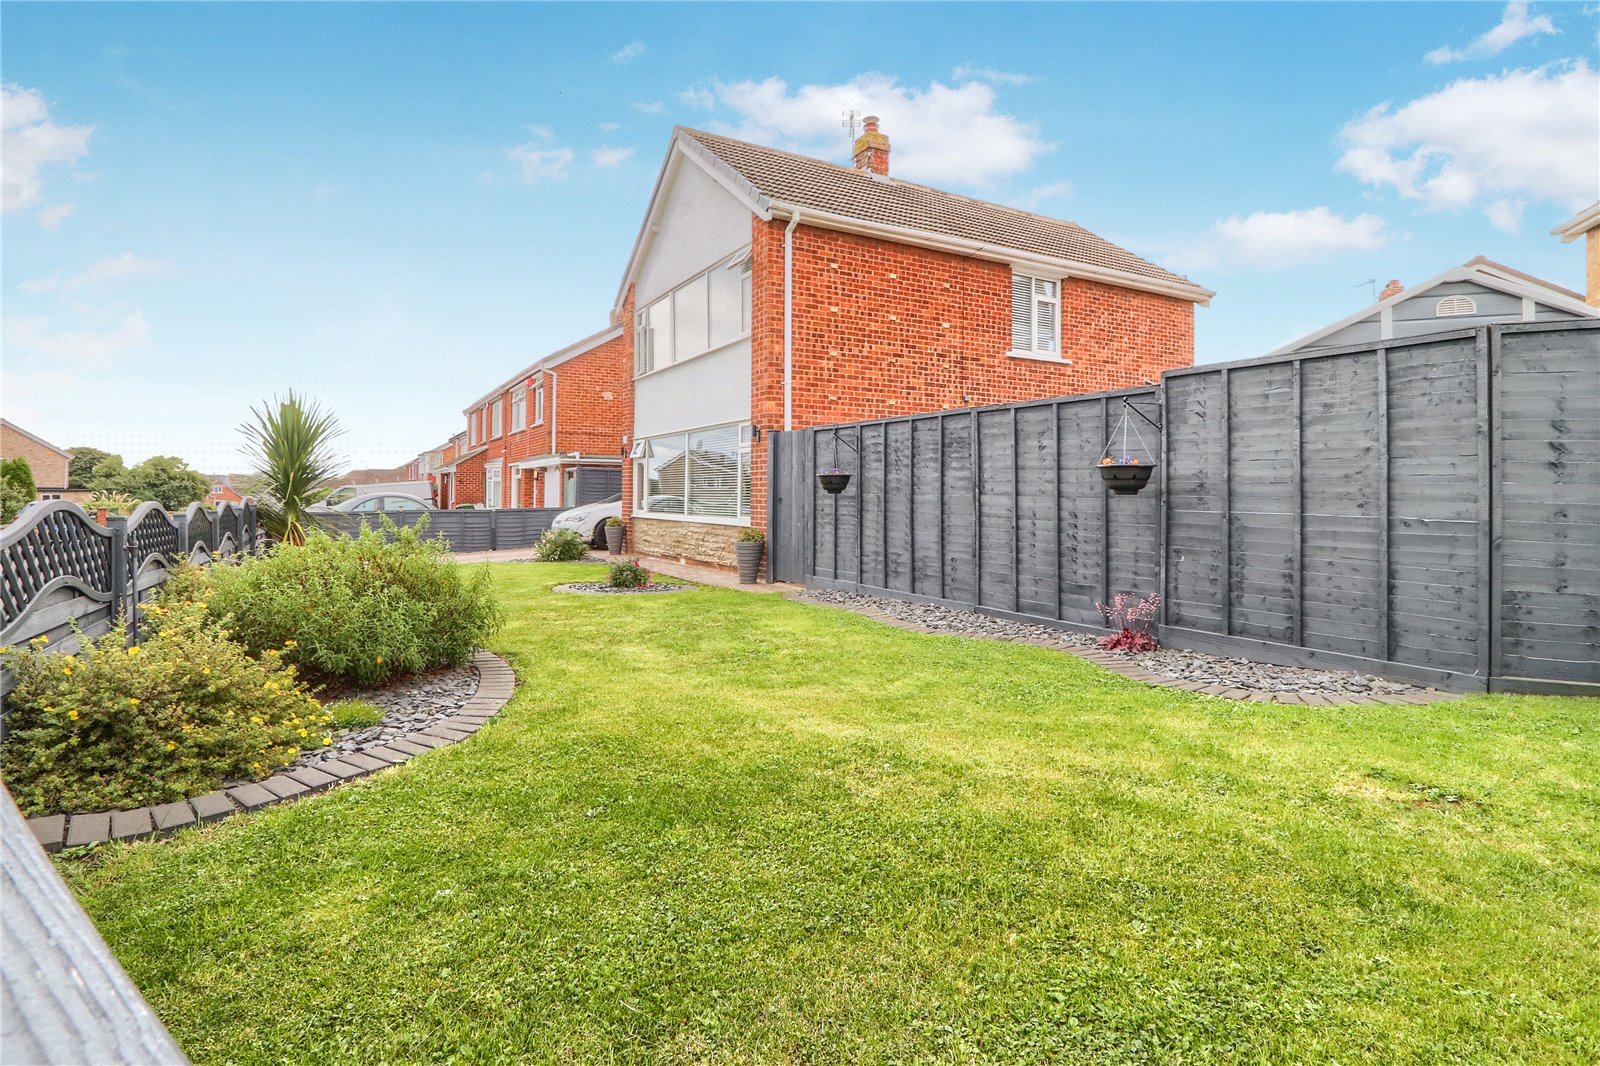 3 bed house for sale in Kildale Grove, Fairfield 1